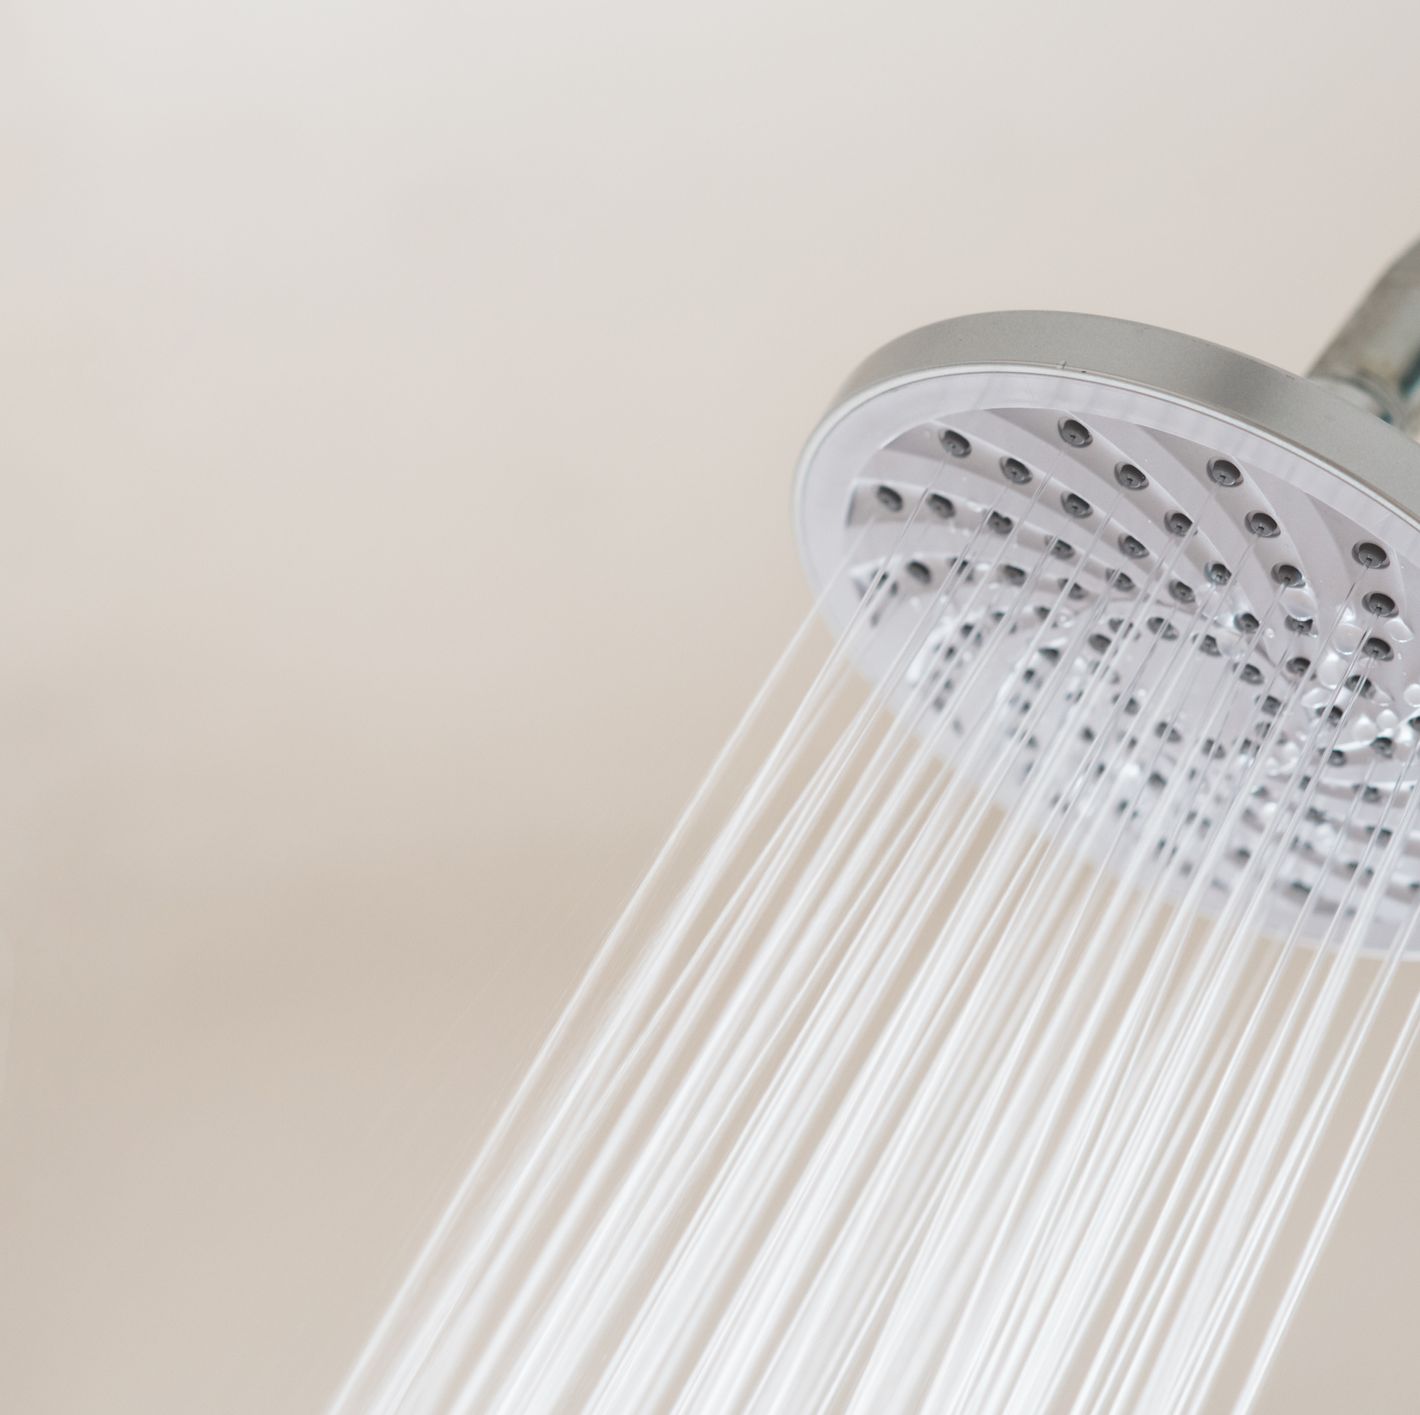 Hot Water Vs. Cold Water: The Ultimate Shower Experiment